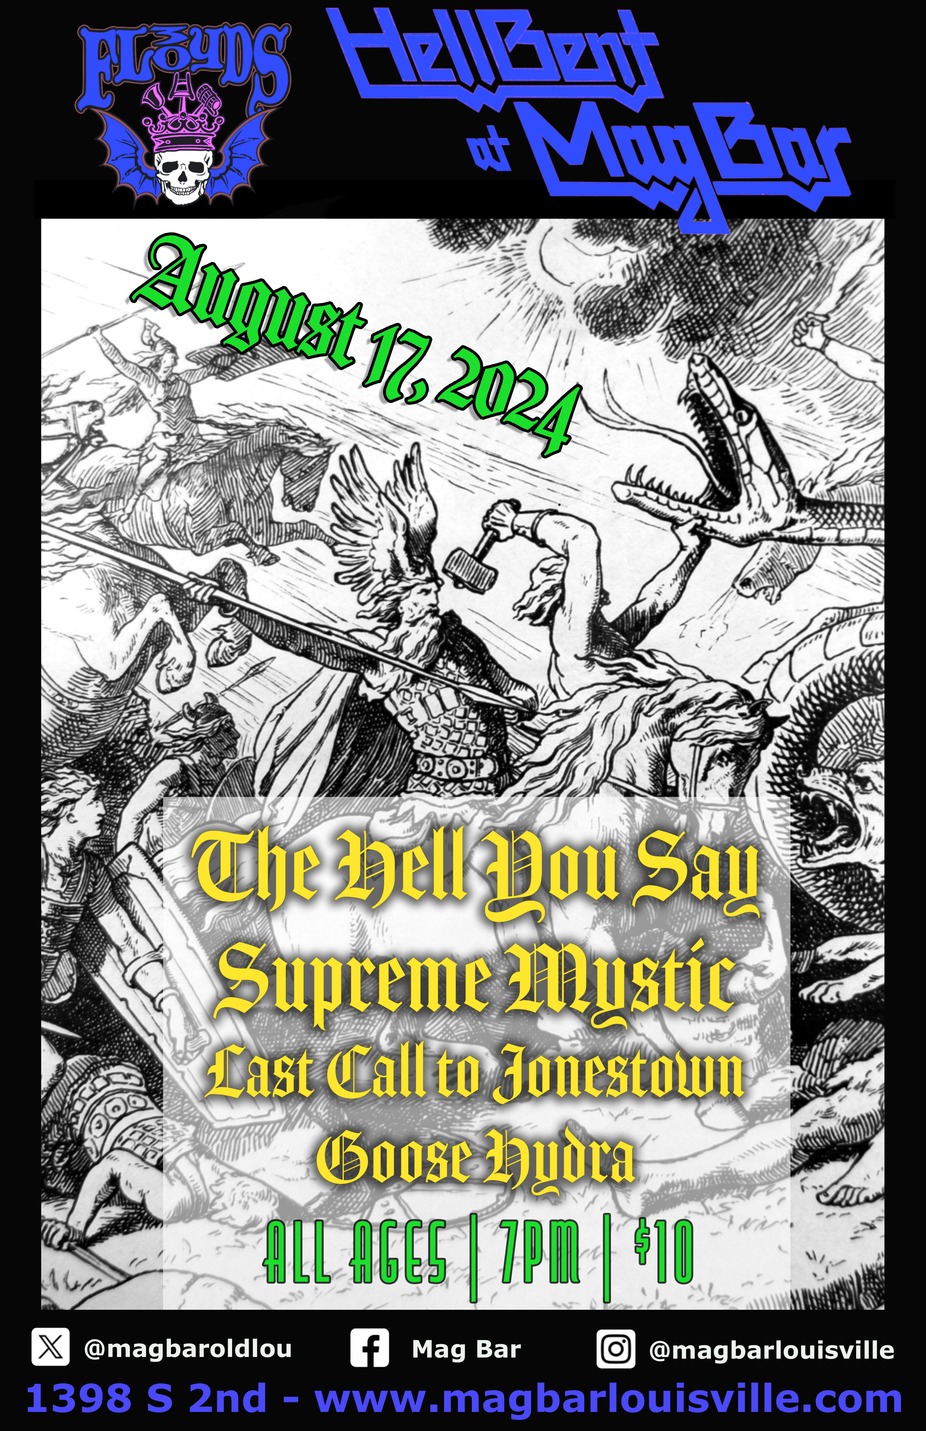 All Ages - HELLBent at Mag Bar - The Hell You Say+Supreme Mystic+Last Call to Jonestown+Goose Hydra event photo